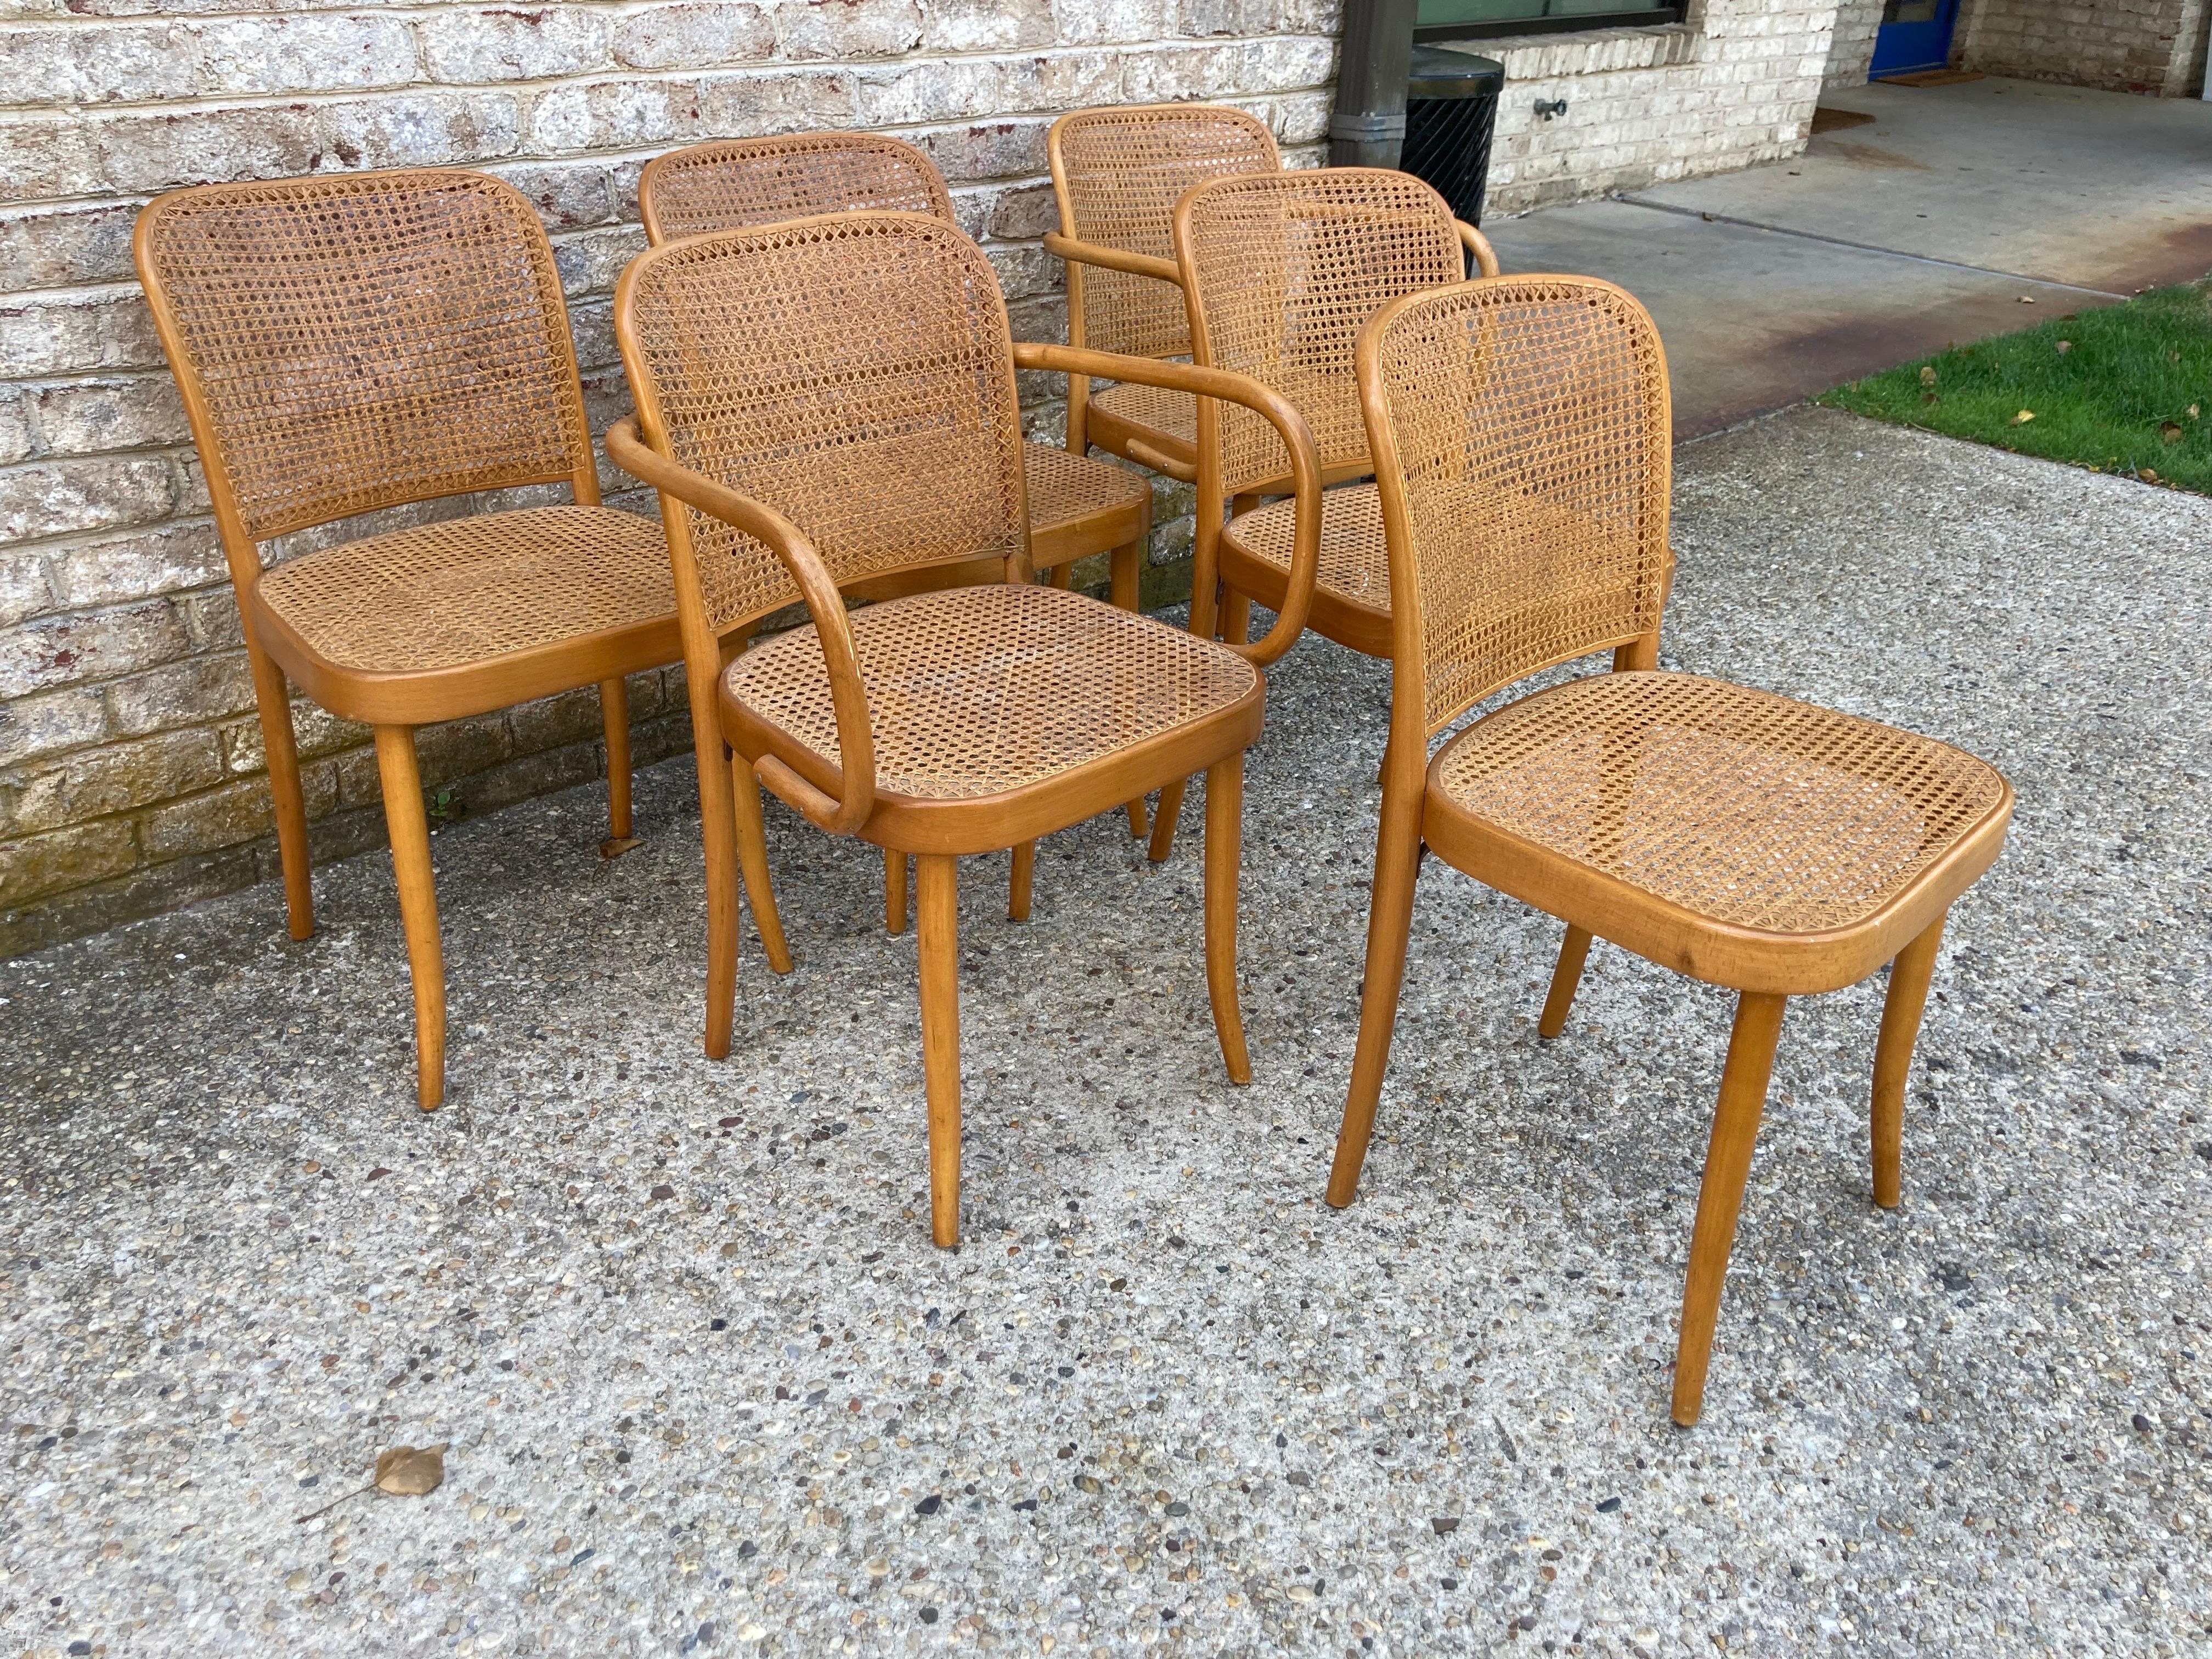 Set of six dining chair by Josef Hoffmann for Stendig made of cane and bentwood.... 2 arm chairs and 4 side chairs.